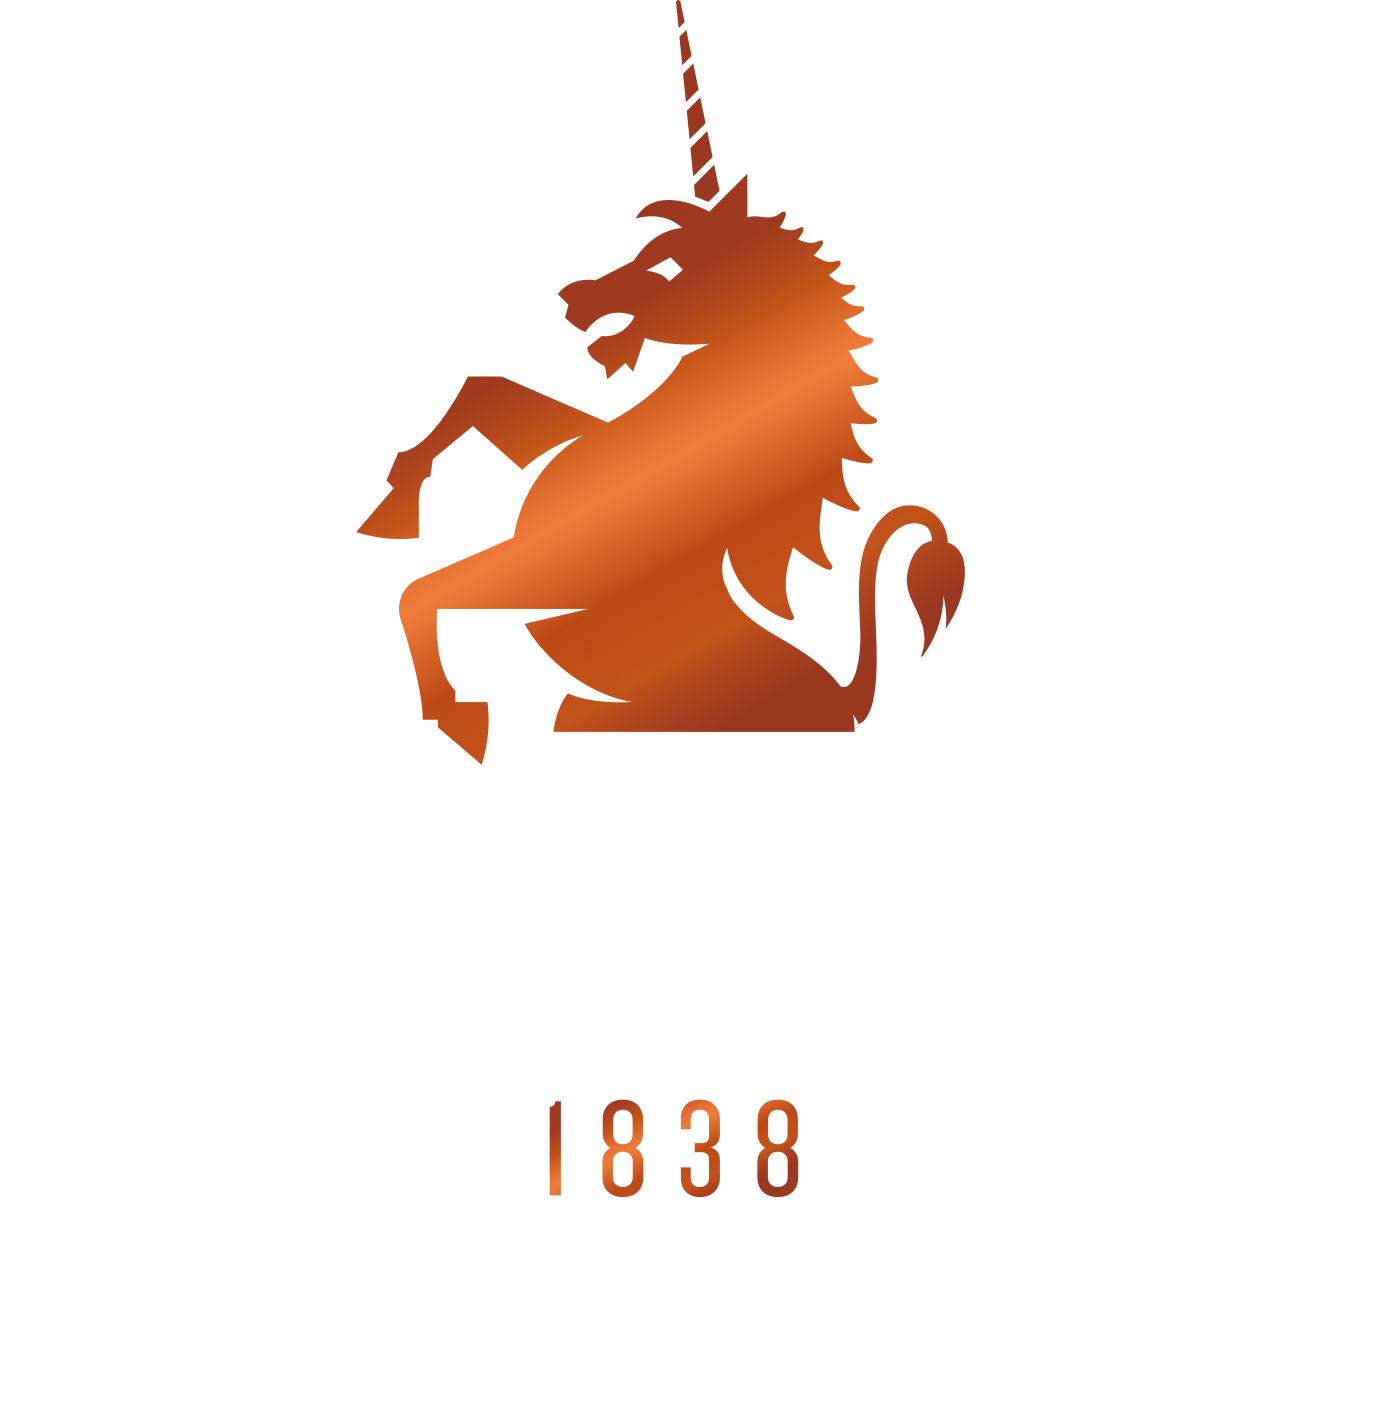 52 266k Portable Network Graphic - Robinsons Brewery Logo (1373x1413)